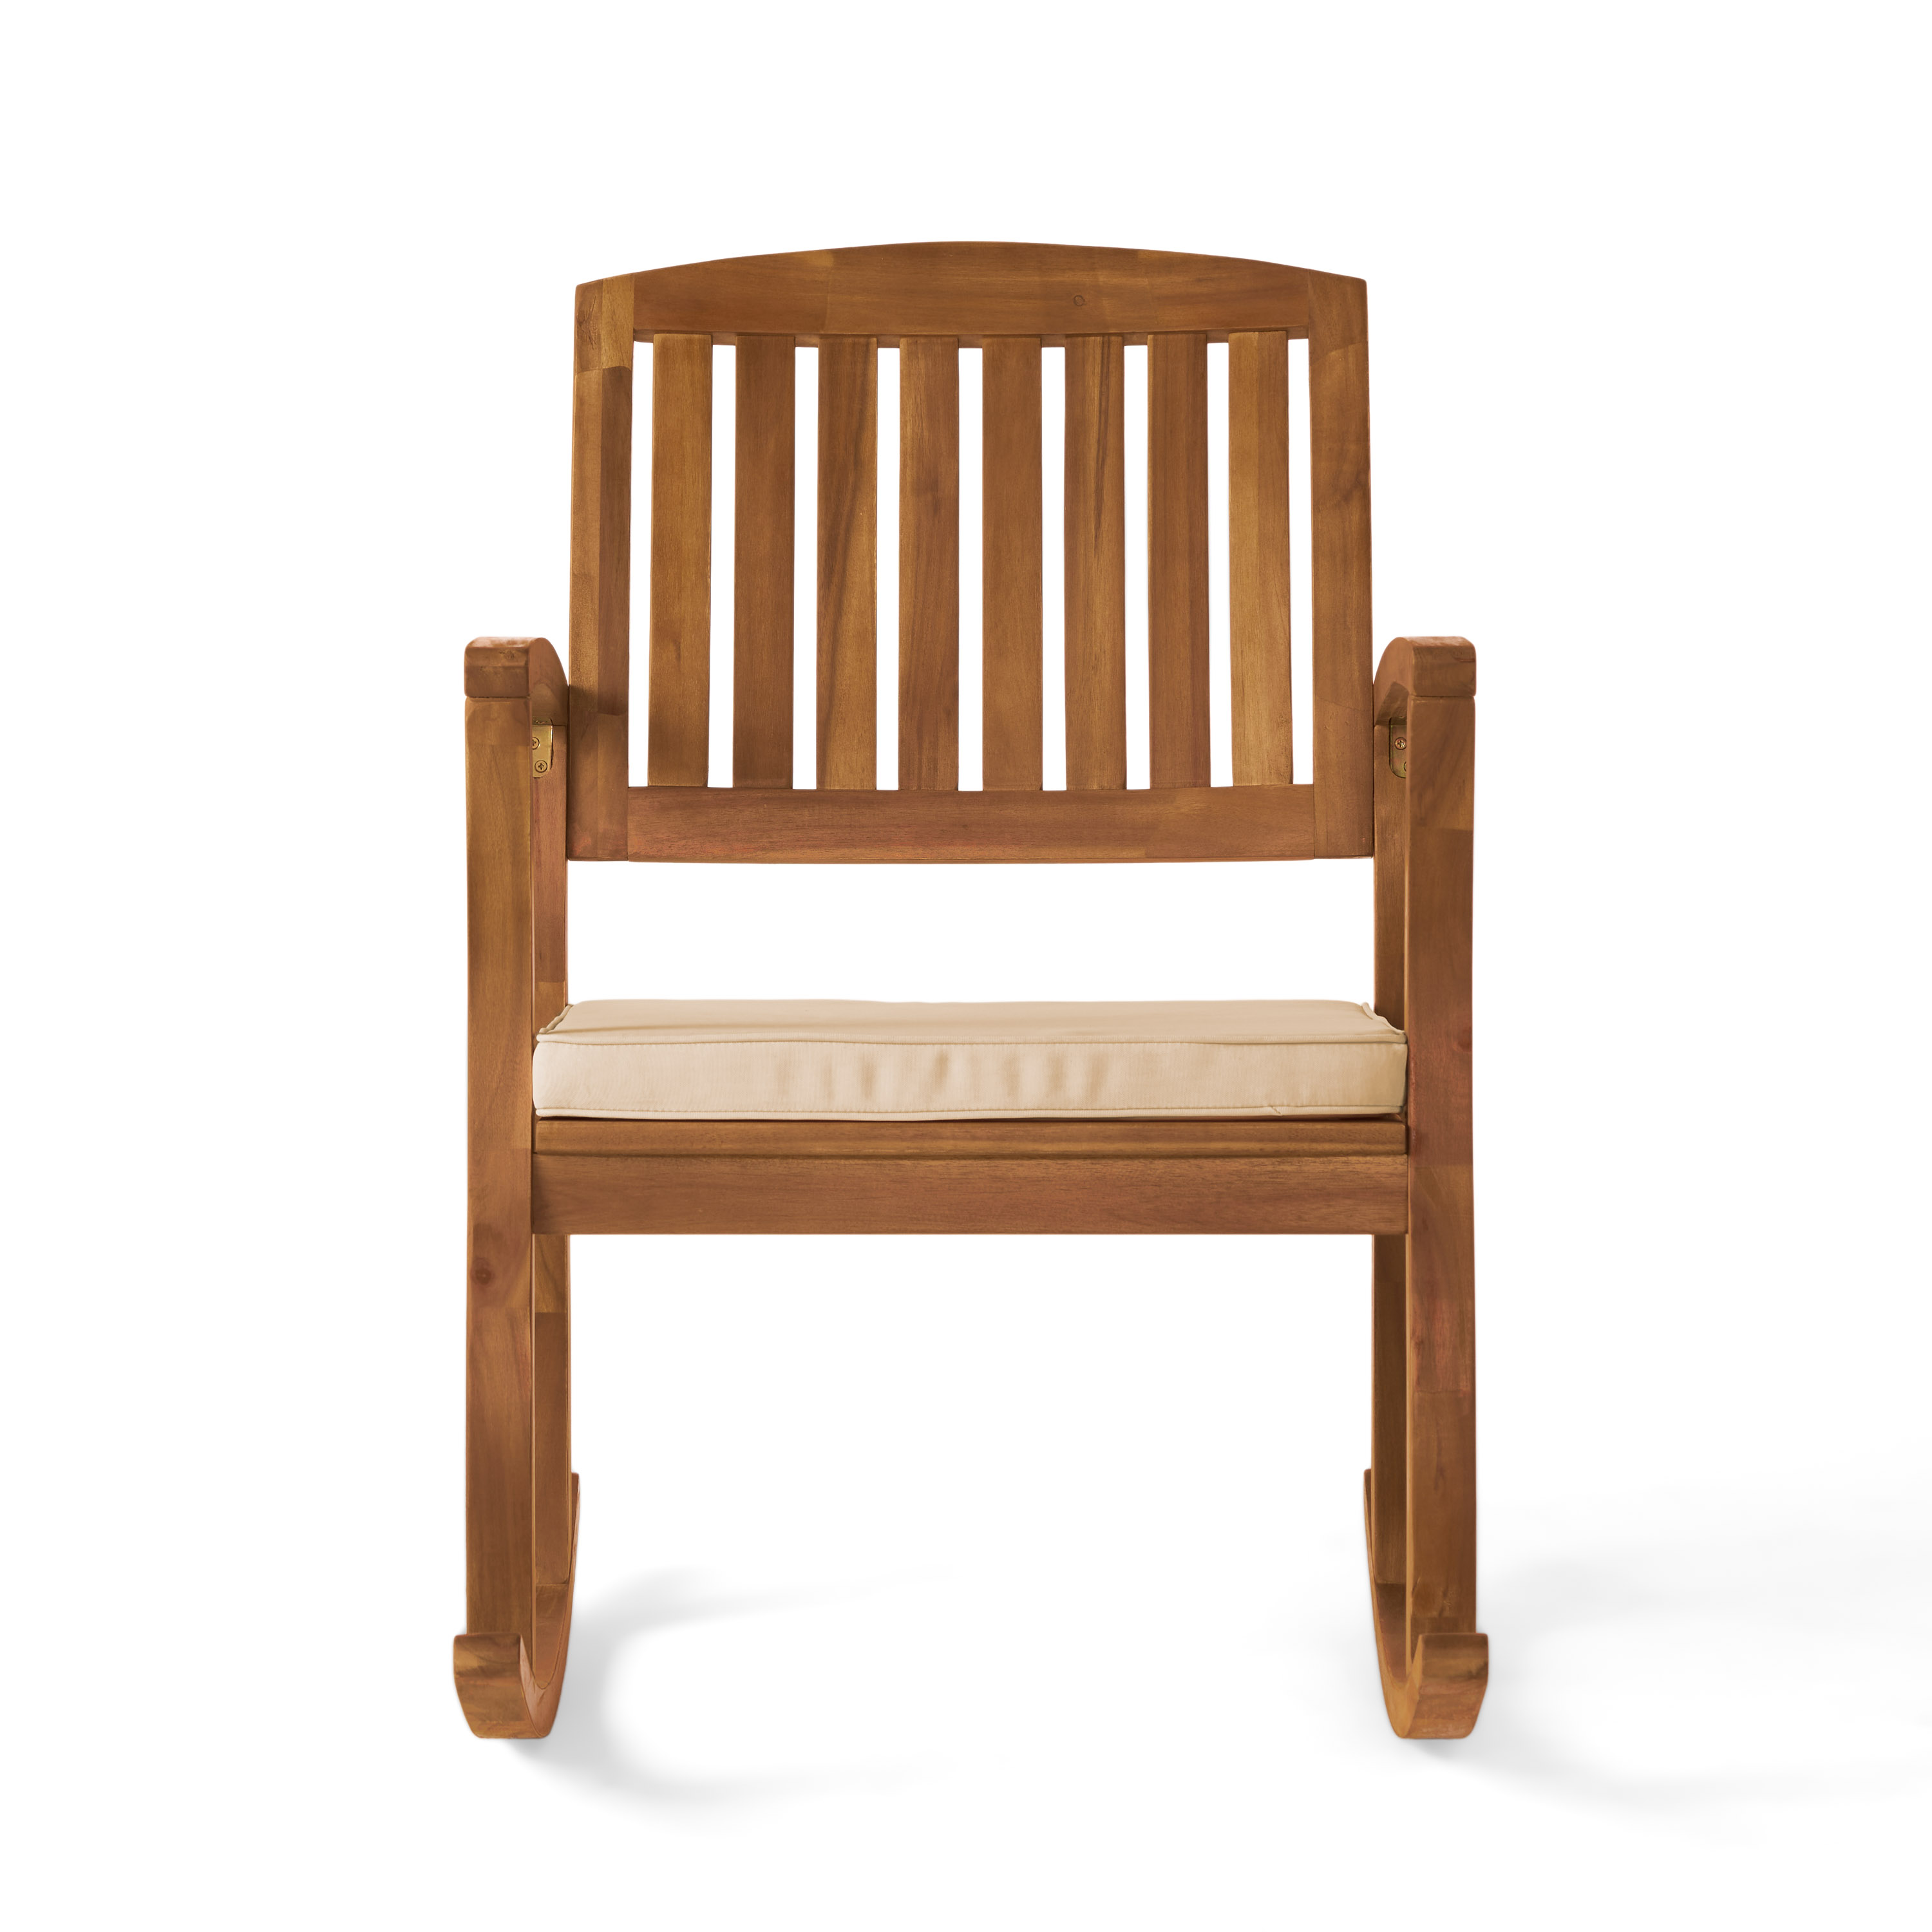 GDF Studio Amber Outdoor Acacia Wood Rocking Chair with Cushion, Teak and Cream Off-White - image 4 of 12